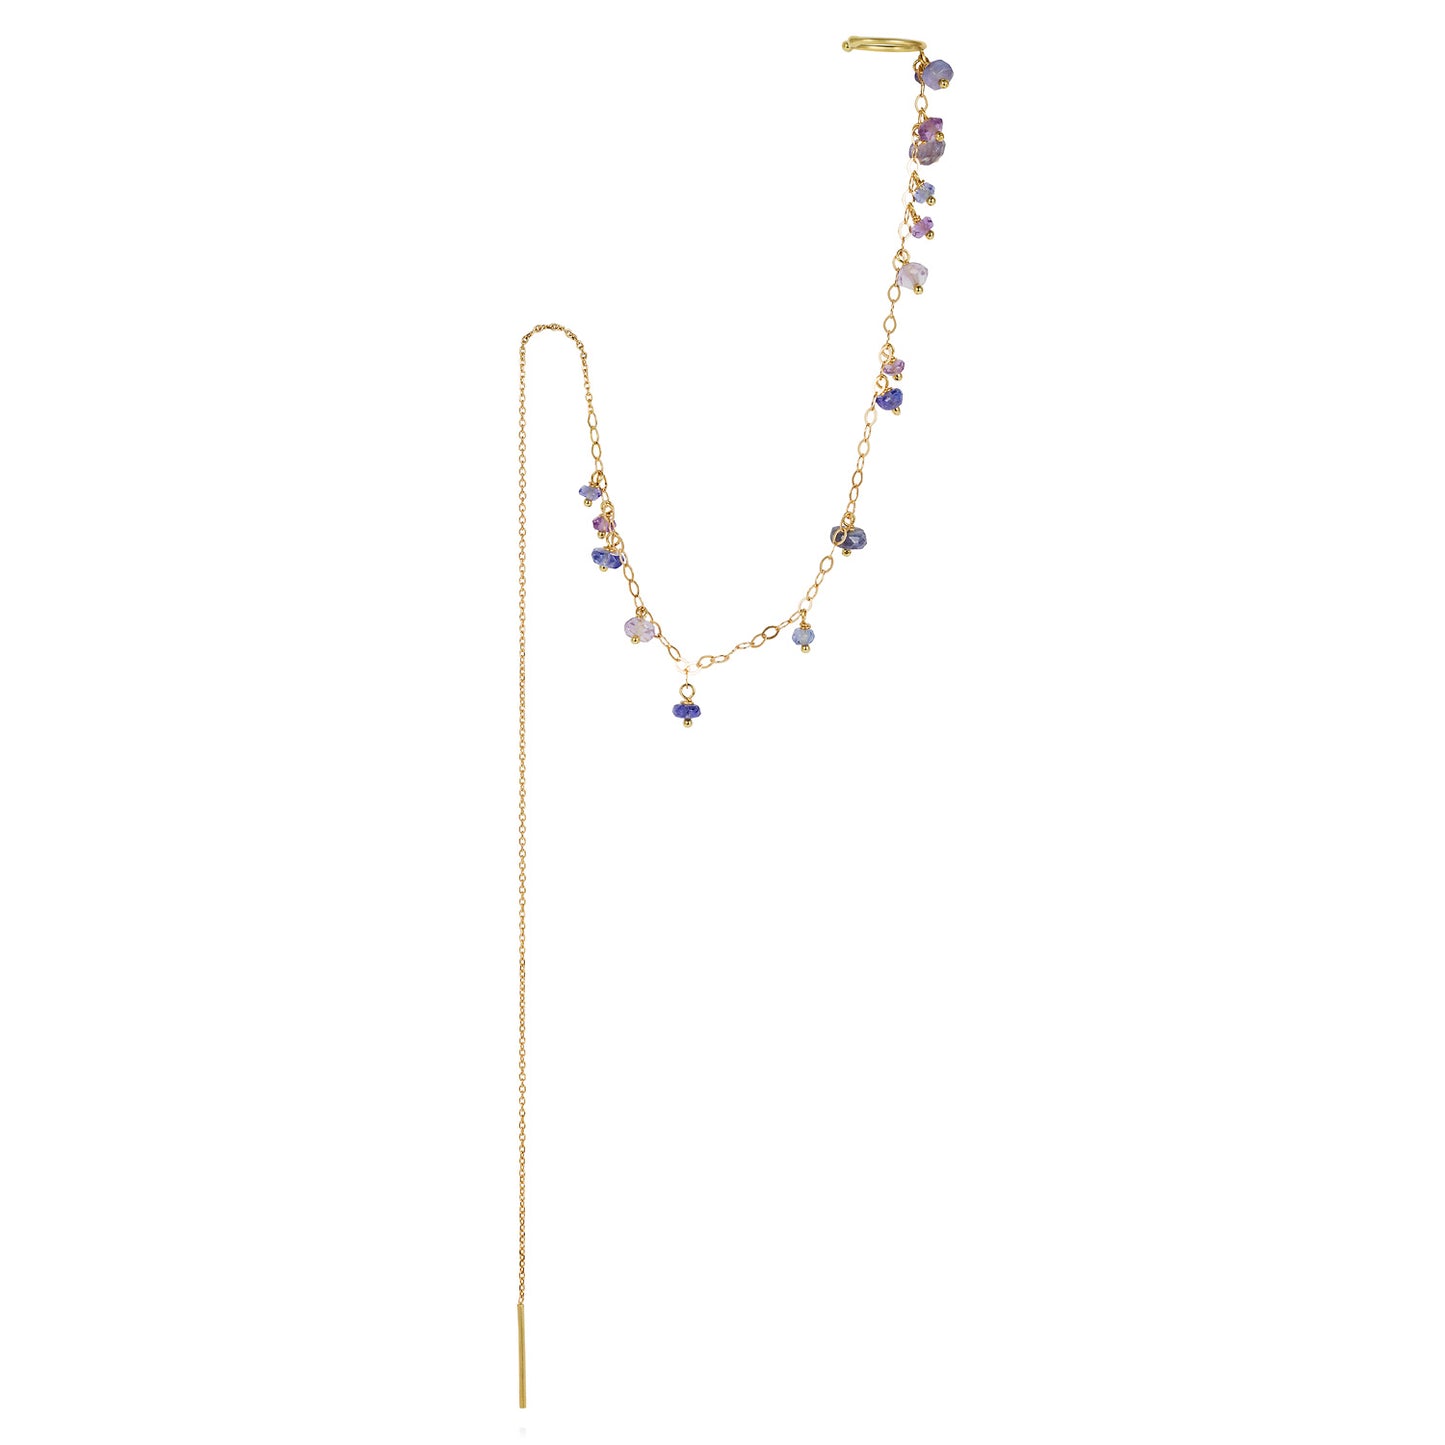 18ct yellow gold thread though earring with chain to ear cuff and tanzanite and amethyst beads